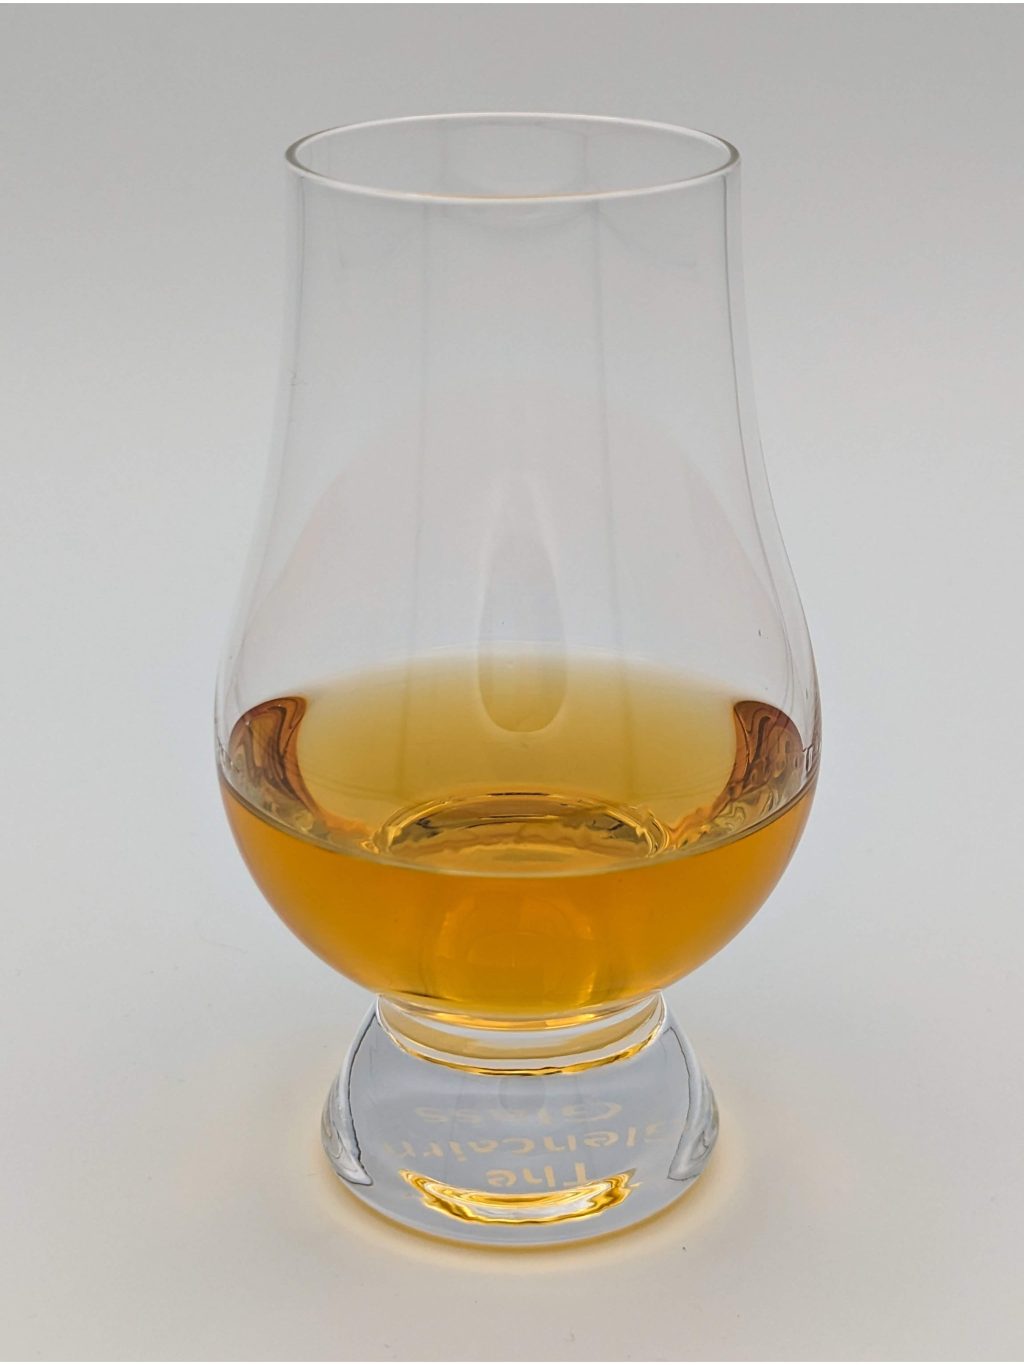 Light brown colored liquid in a glencairn glass